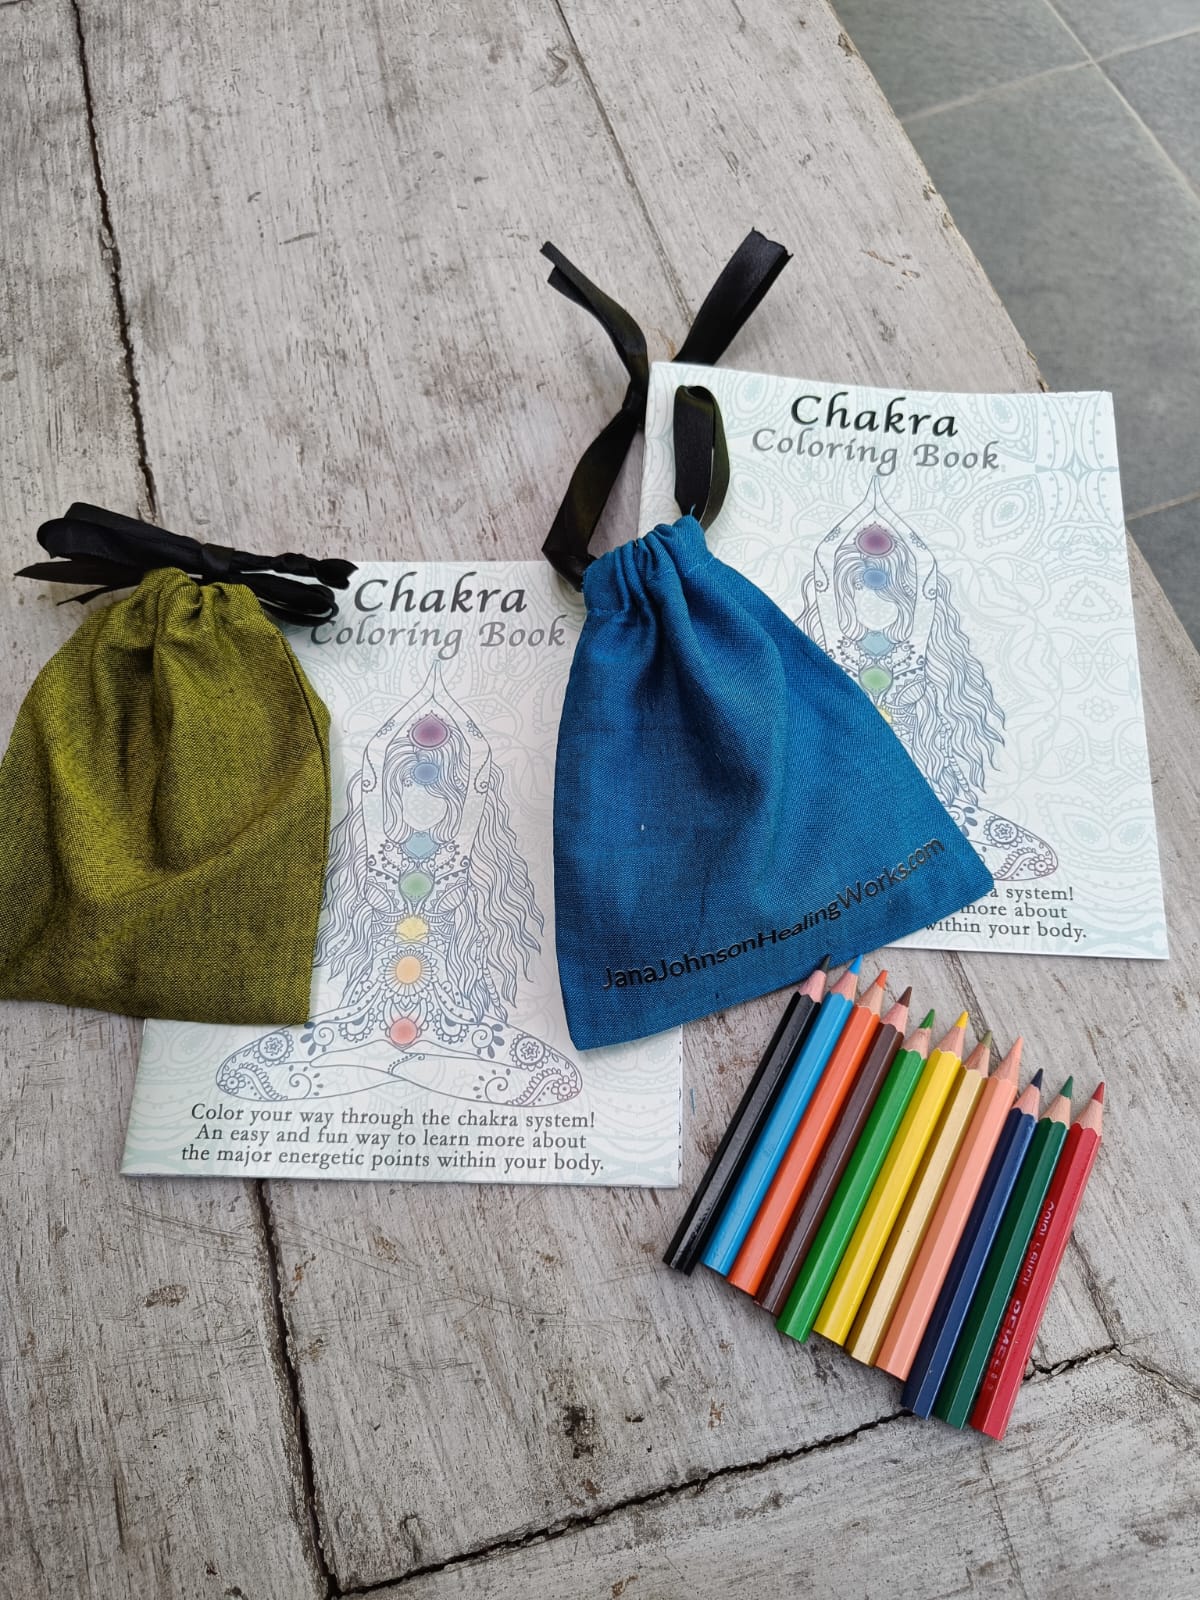 coloring book with a green bag and blue bag and 12 small coloring pencils